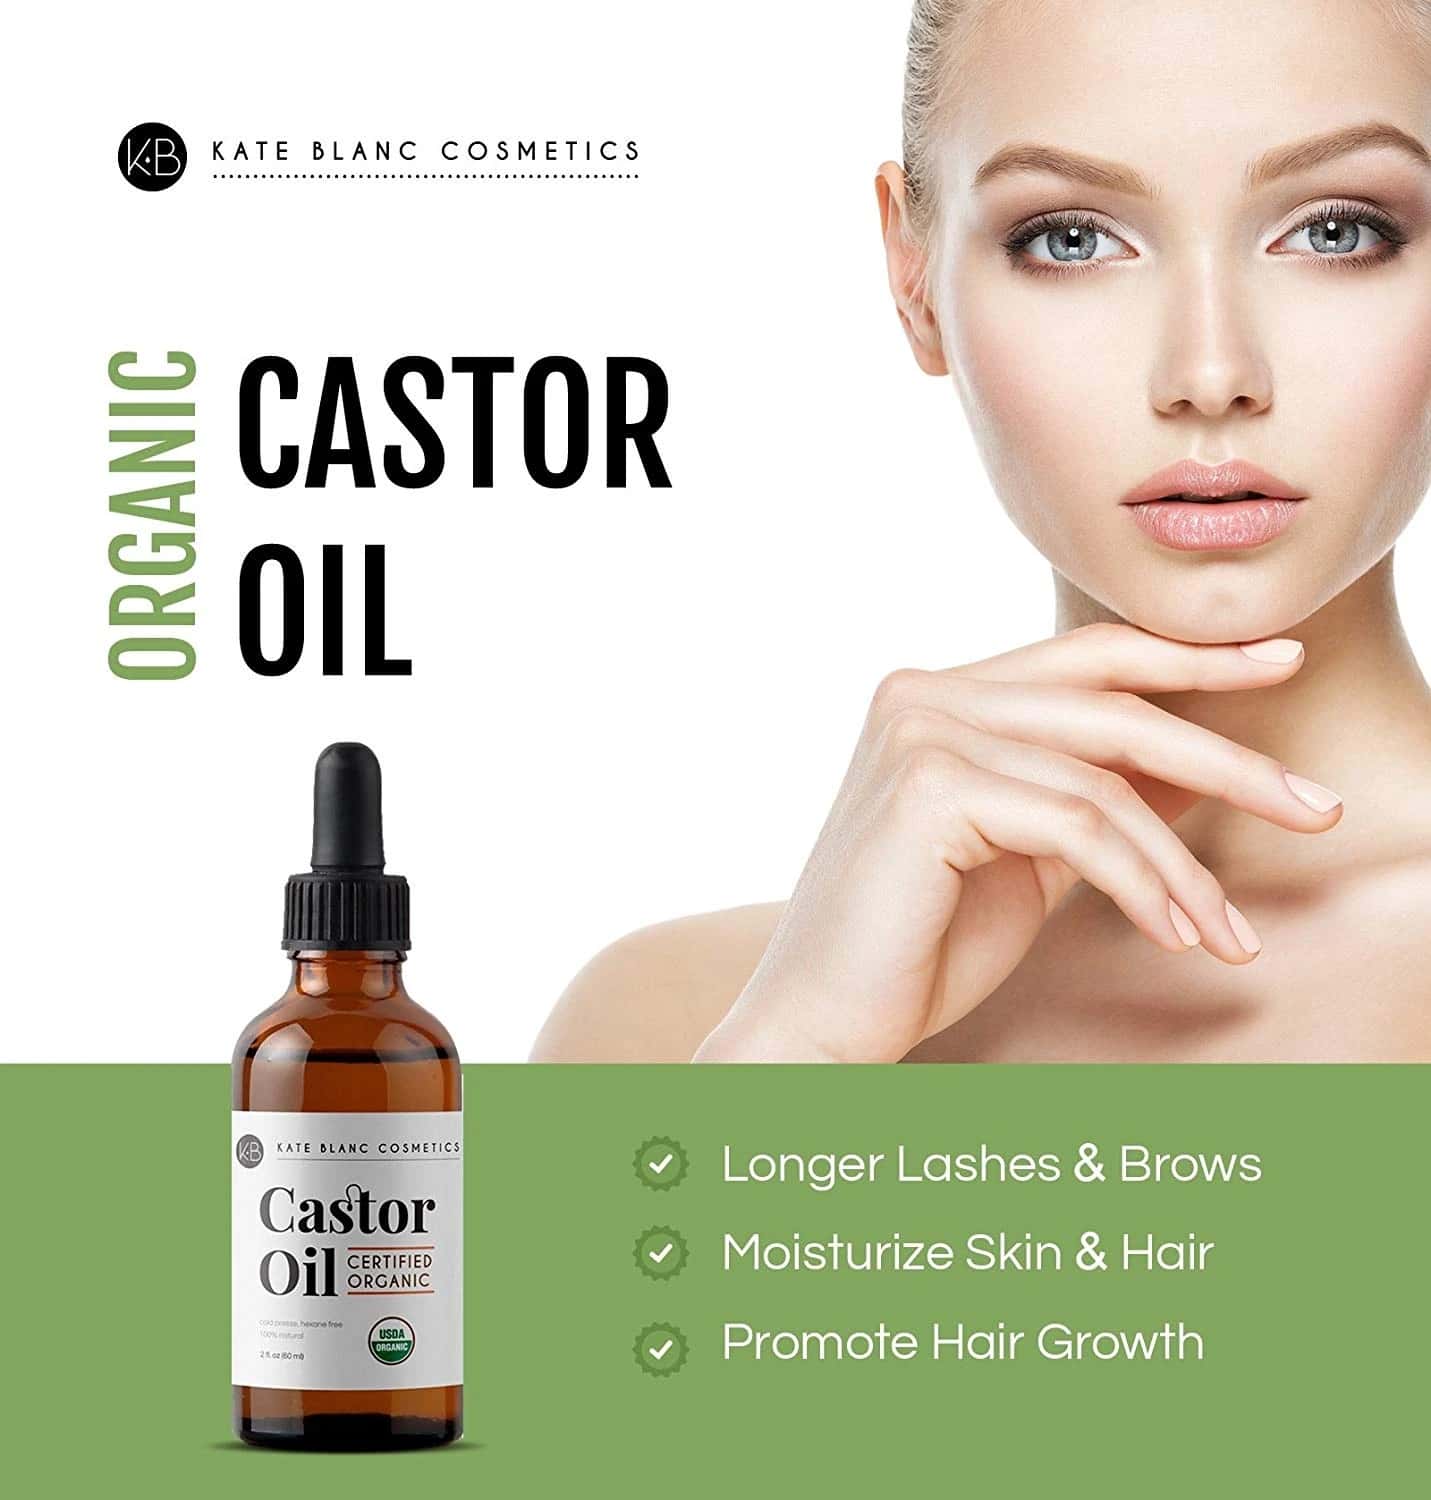 If you’re looking for a natural and organic oil to grow your eyelashes and eyebrows, Kate Blanc’s organic castor oil is a Godsent